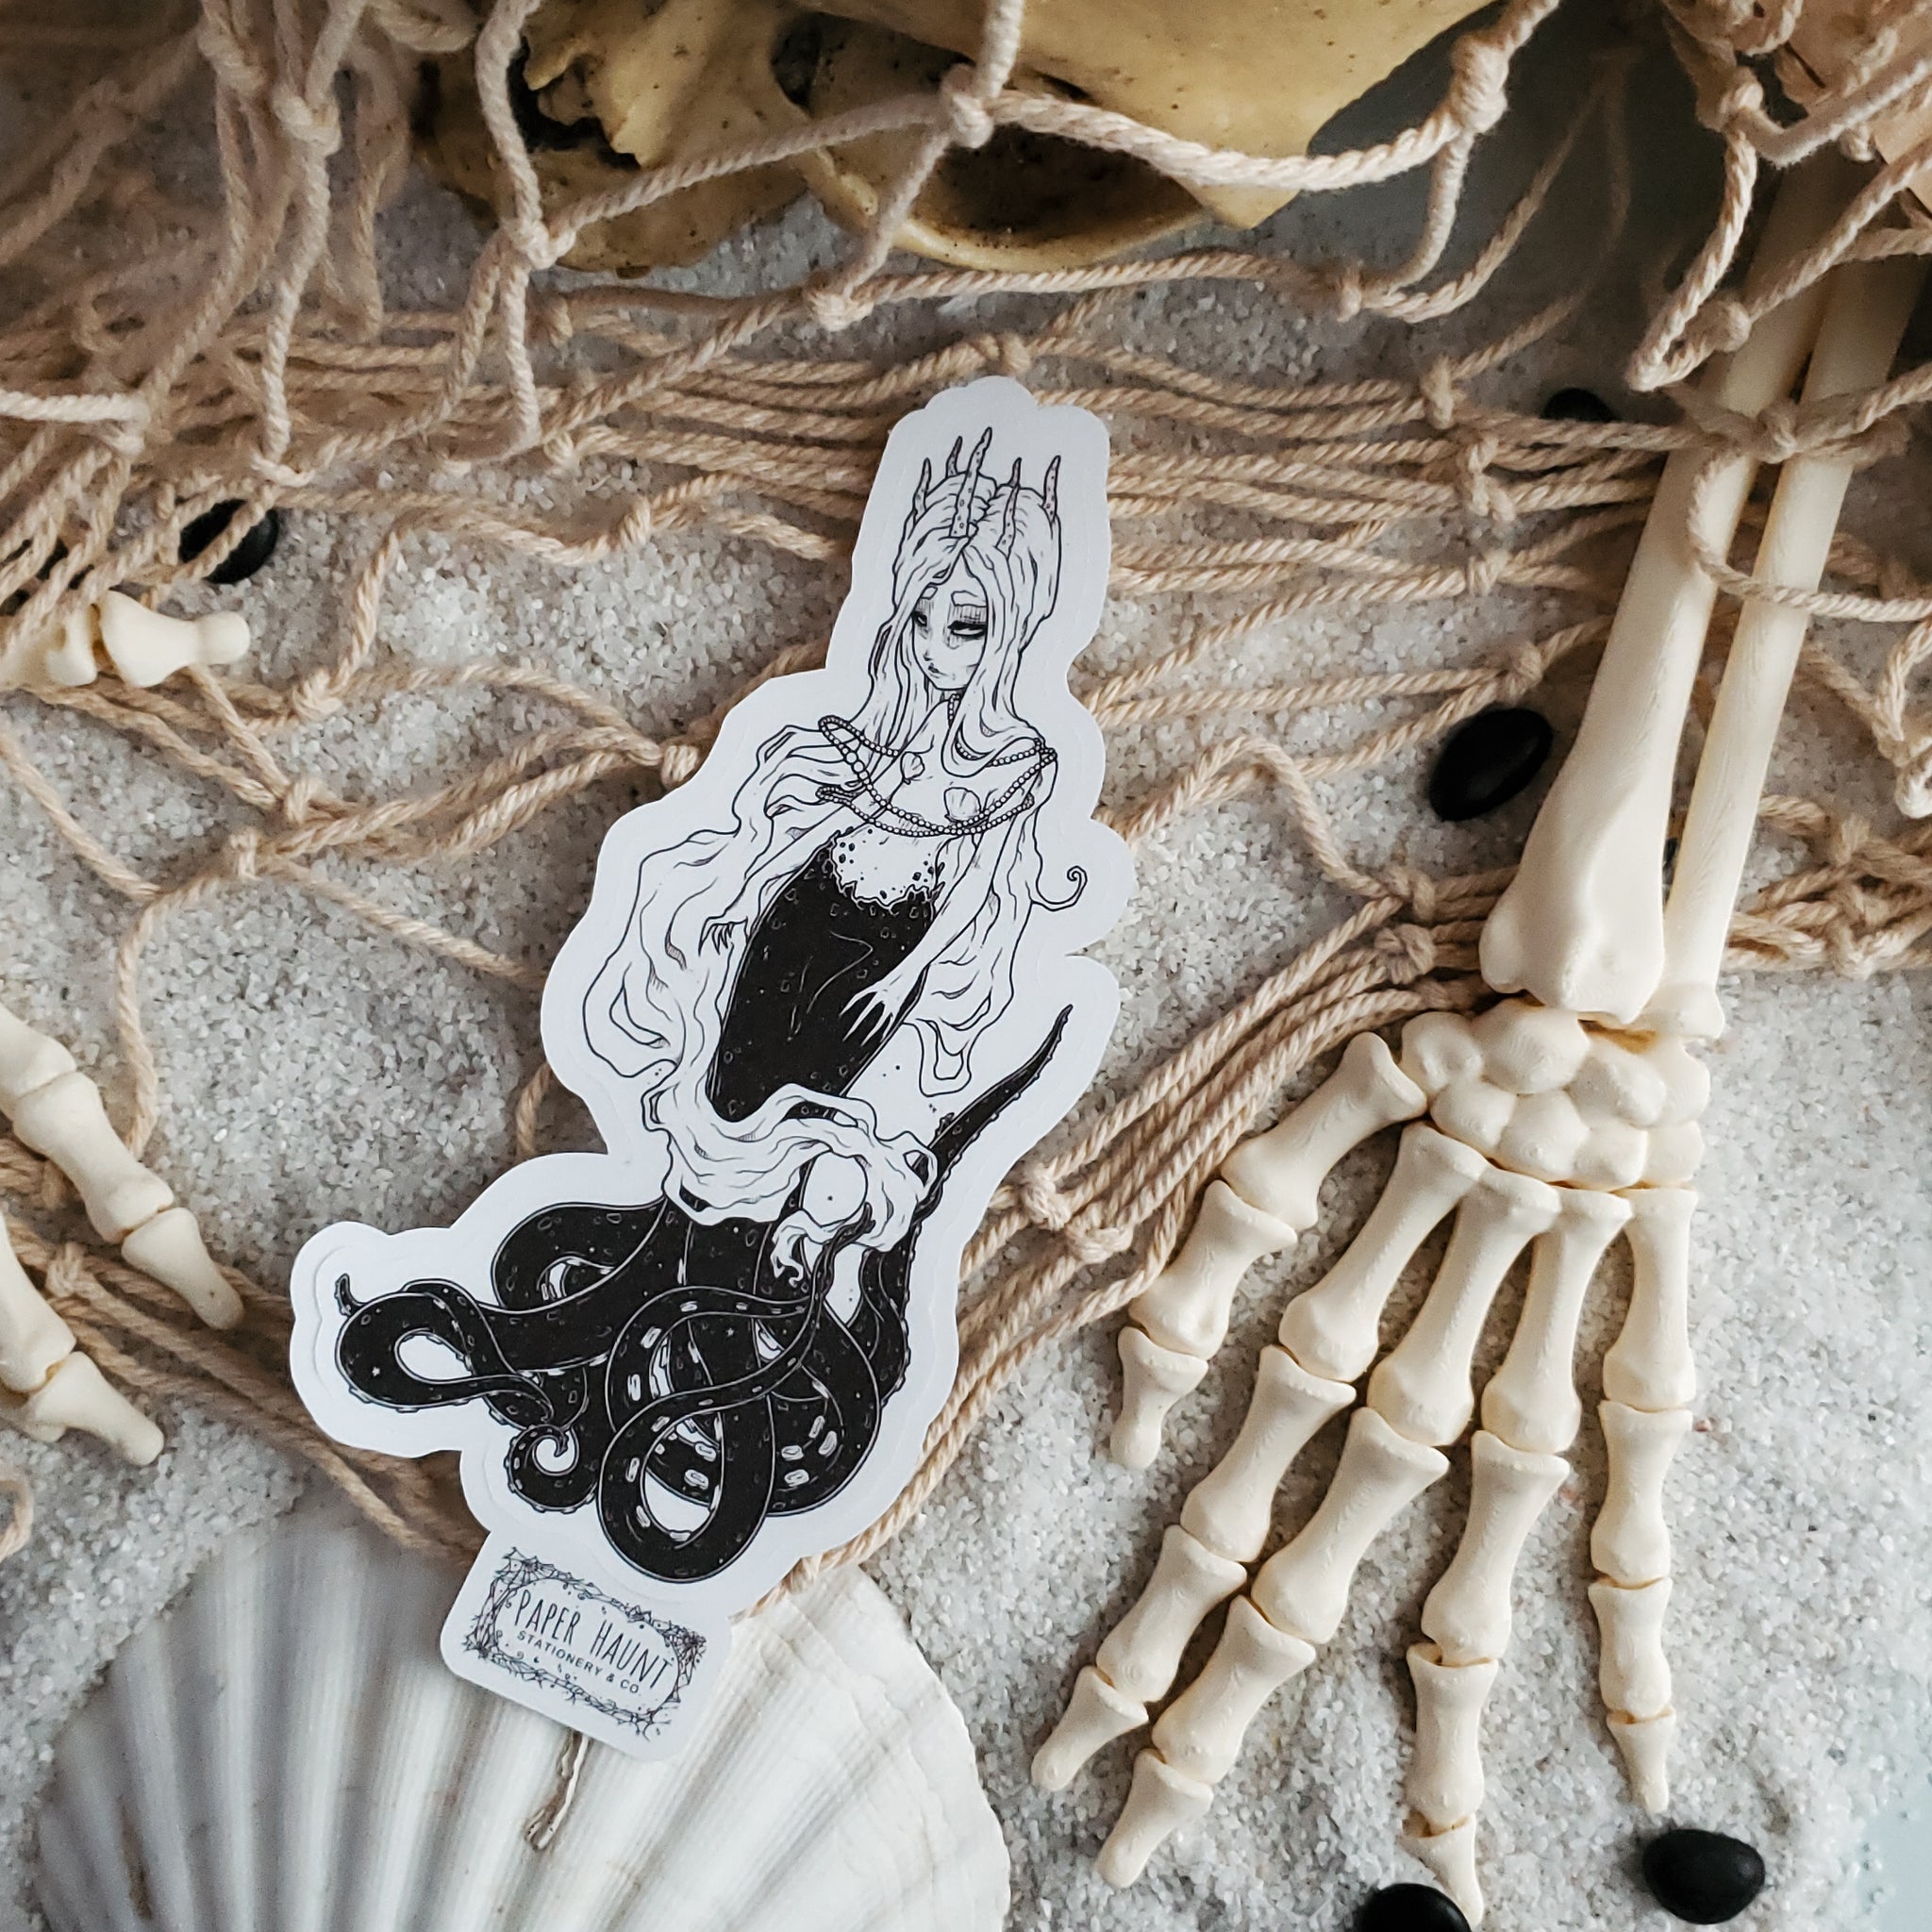 Sea Hag goth tentacle mermaid sticker- Mermaid's Lair - Paper Haunt Stationery & Co- Art by White stag